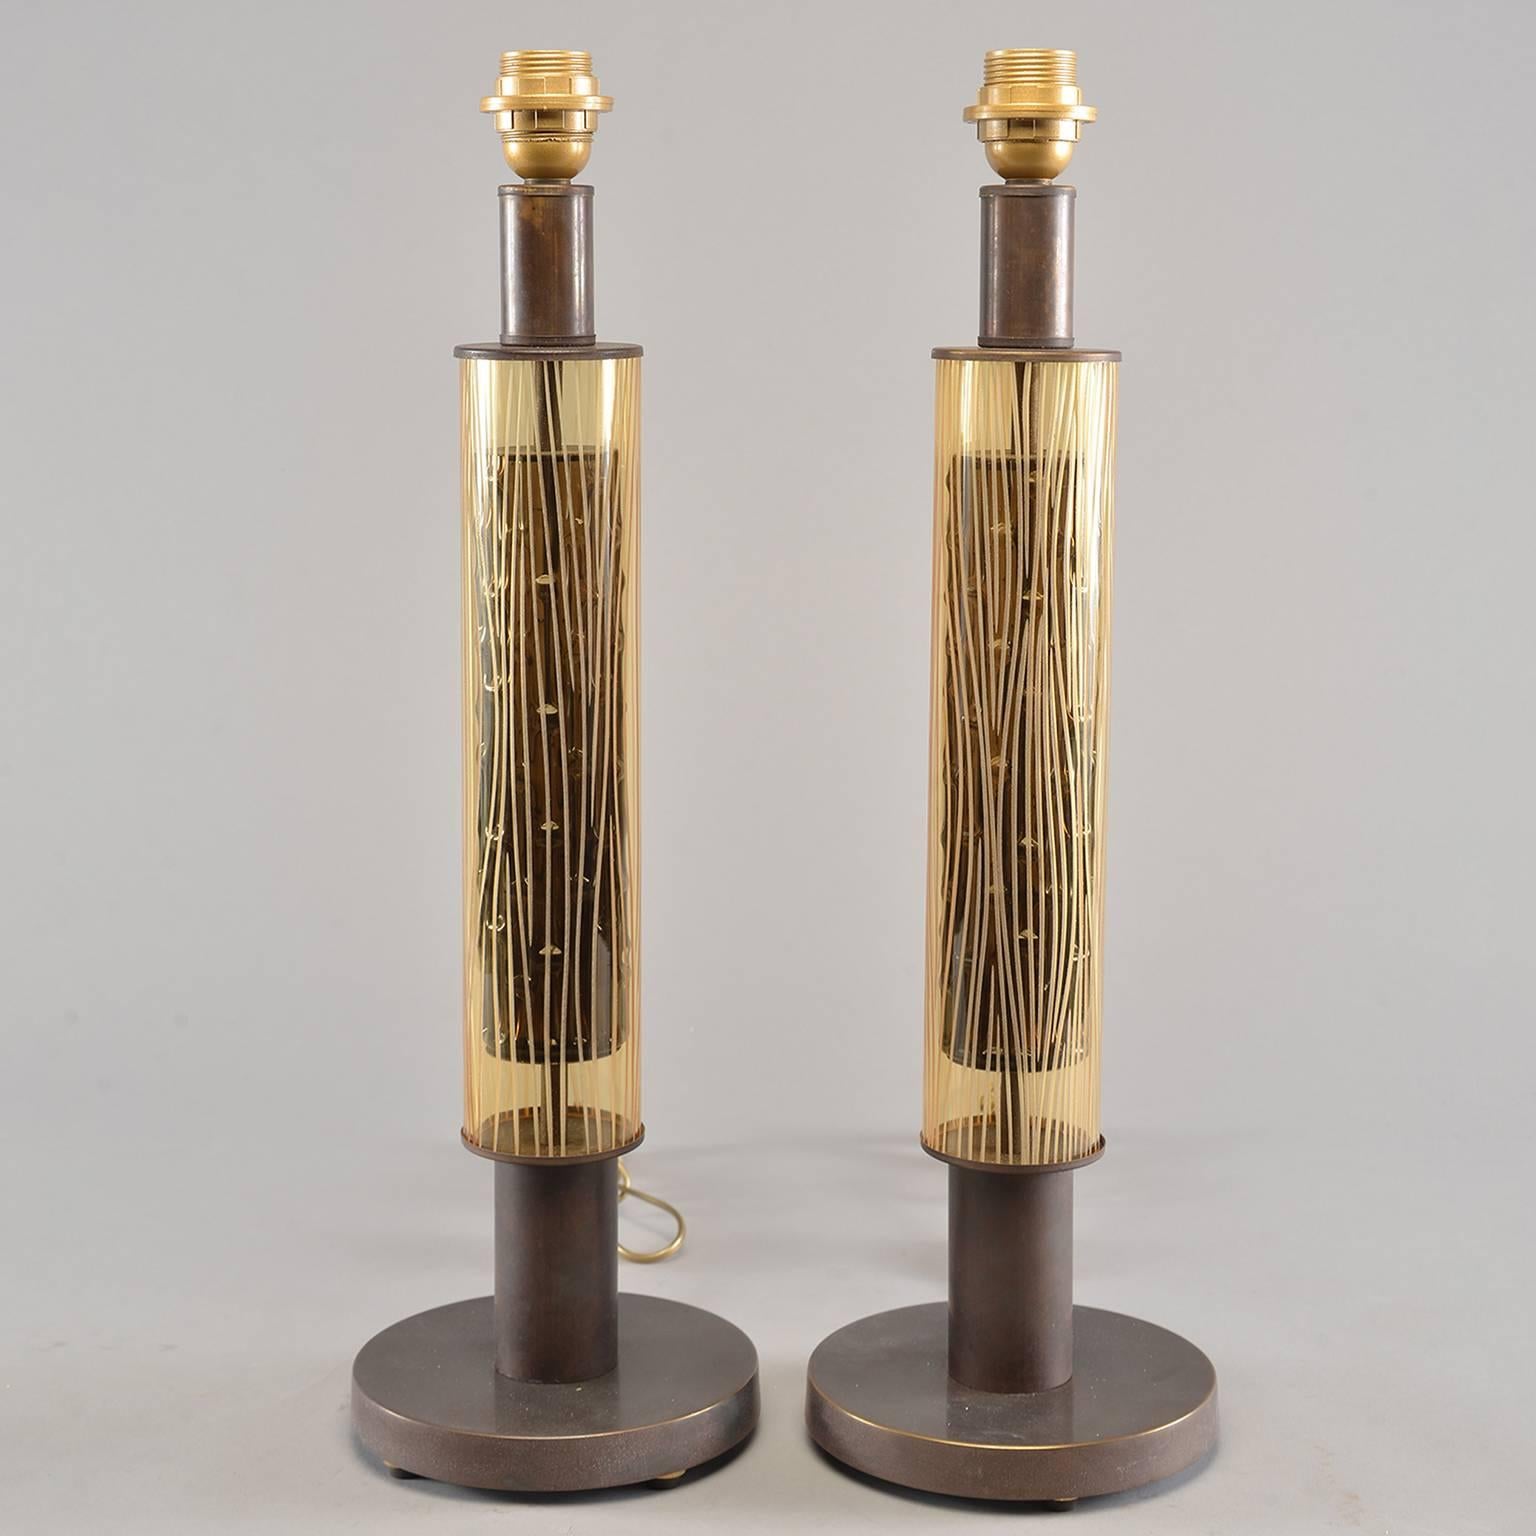 Pair of Italian table lamps have bronze colored metal base with etched amber glass cylinder over internal dark brown glass cylinder which gives glass a nice dimensionality. Lamps have been rewired for US electrical standards. Sold and priced as a